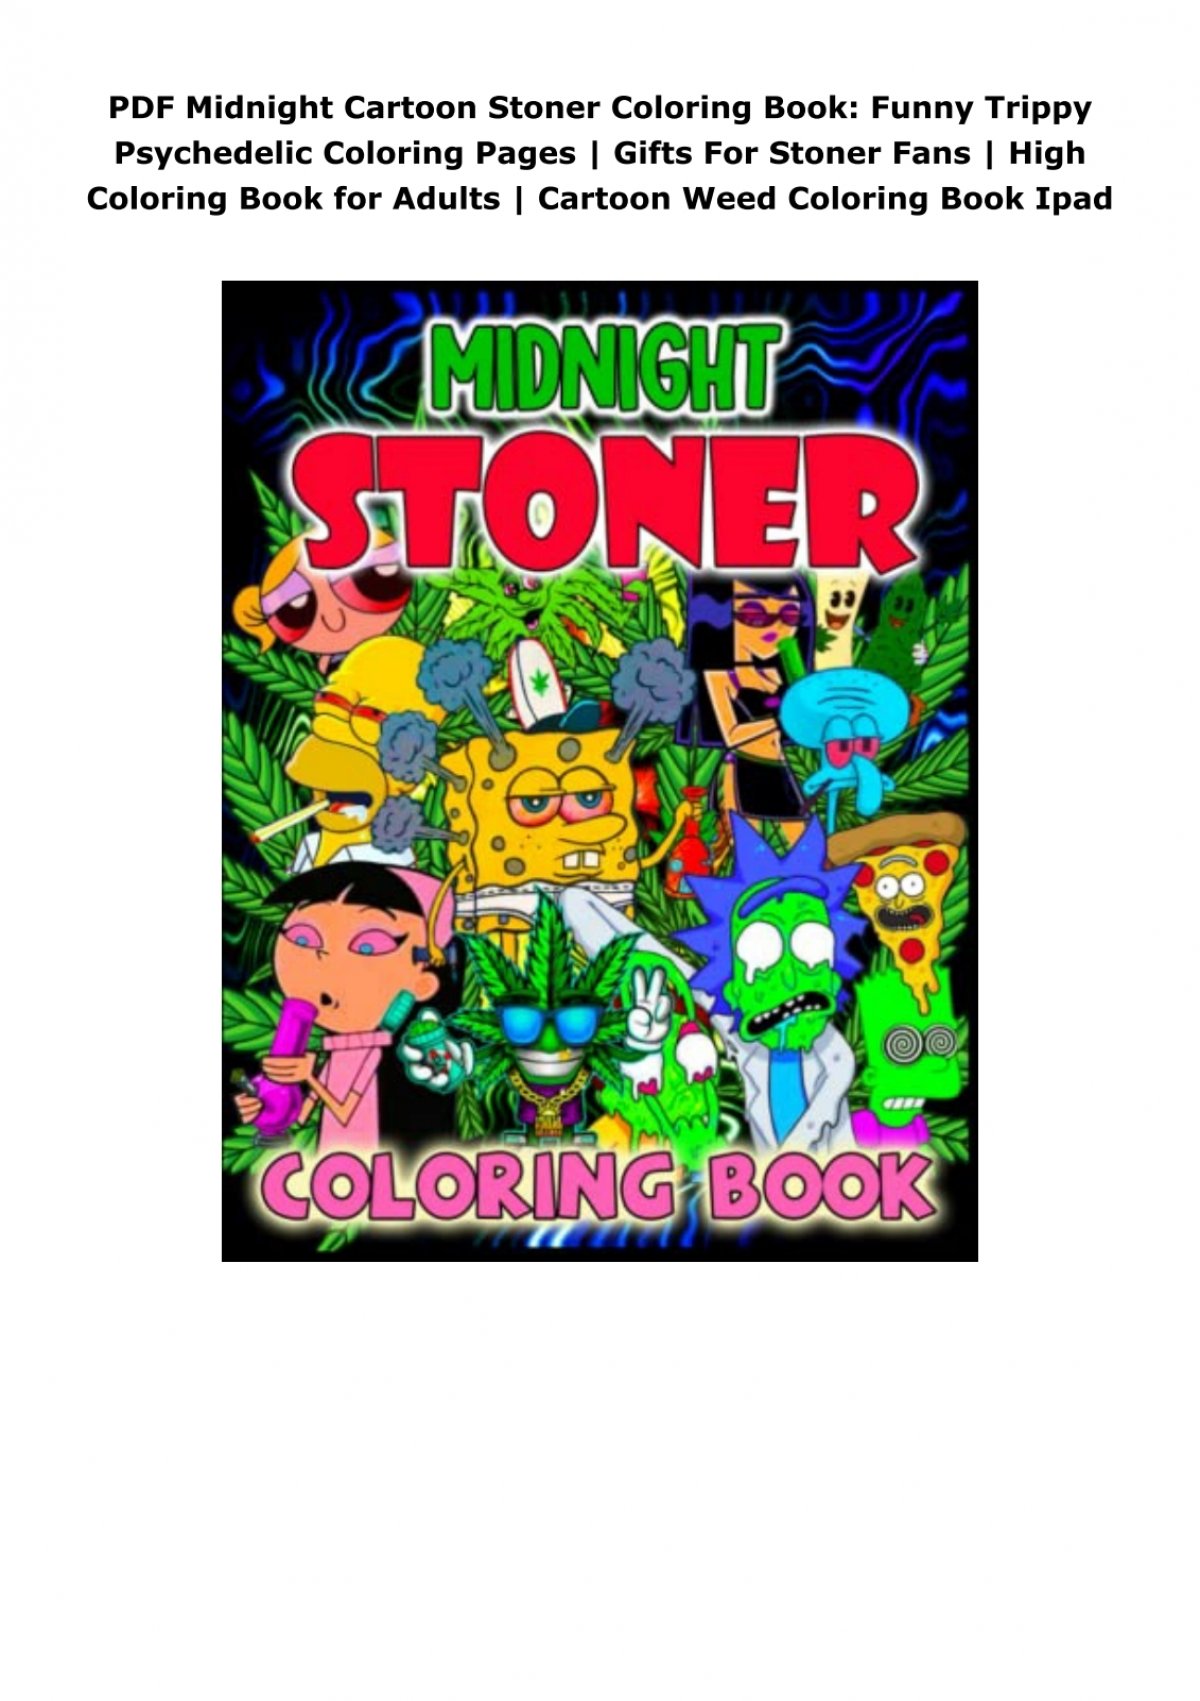 90's Cartoon Stoner Coloring Book For Adults: Trippy Coloring Book